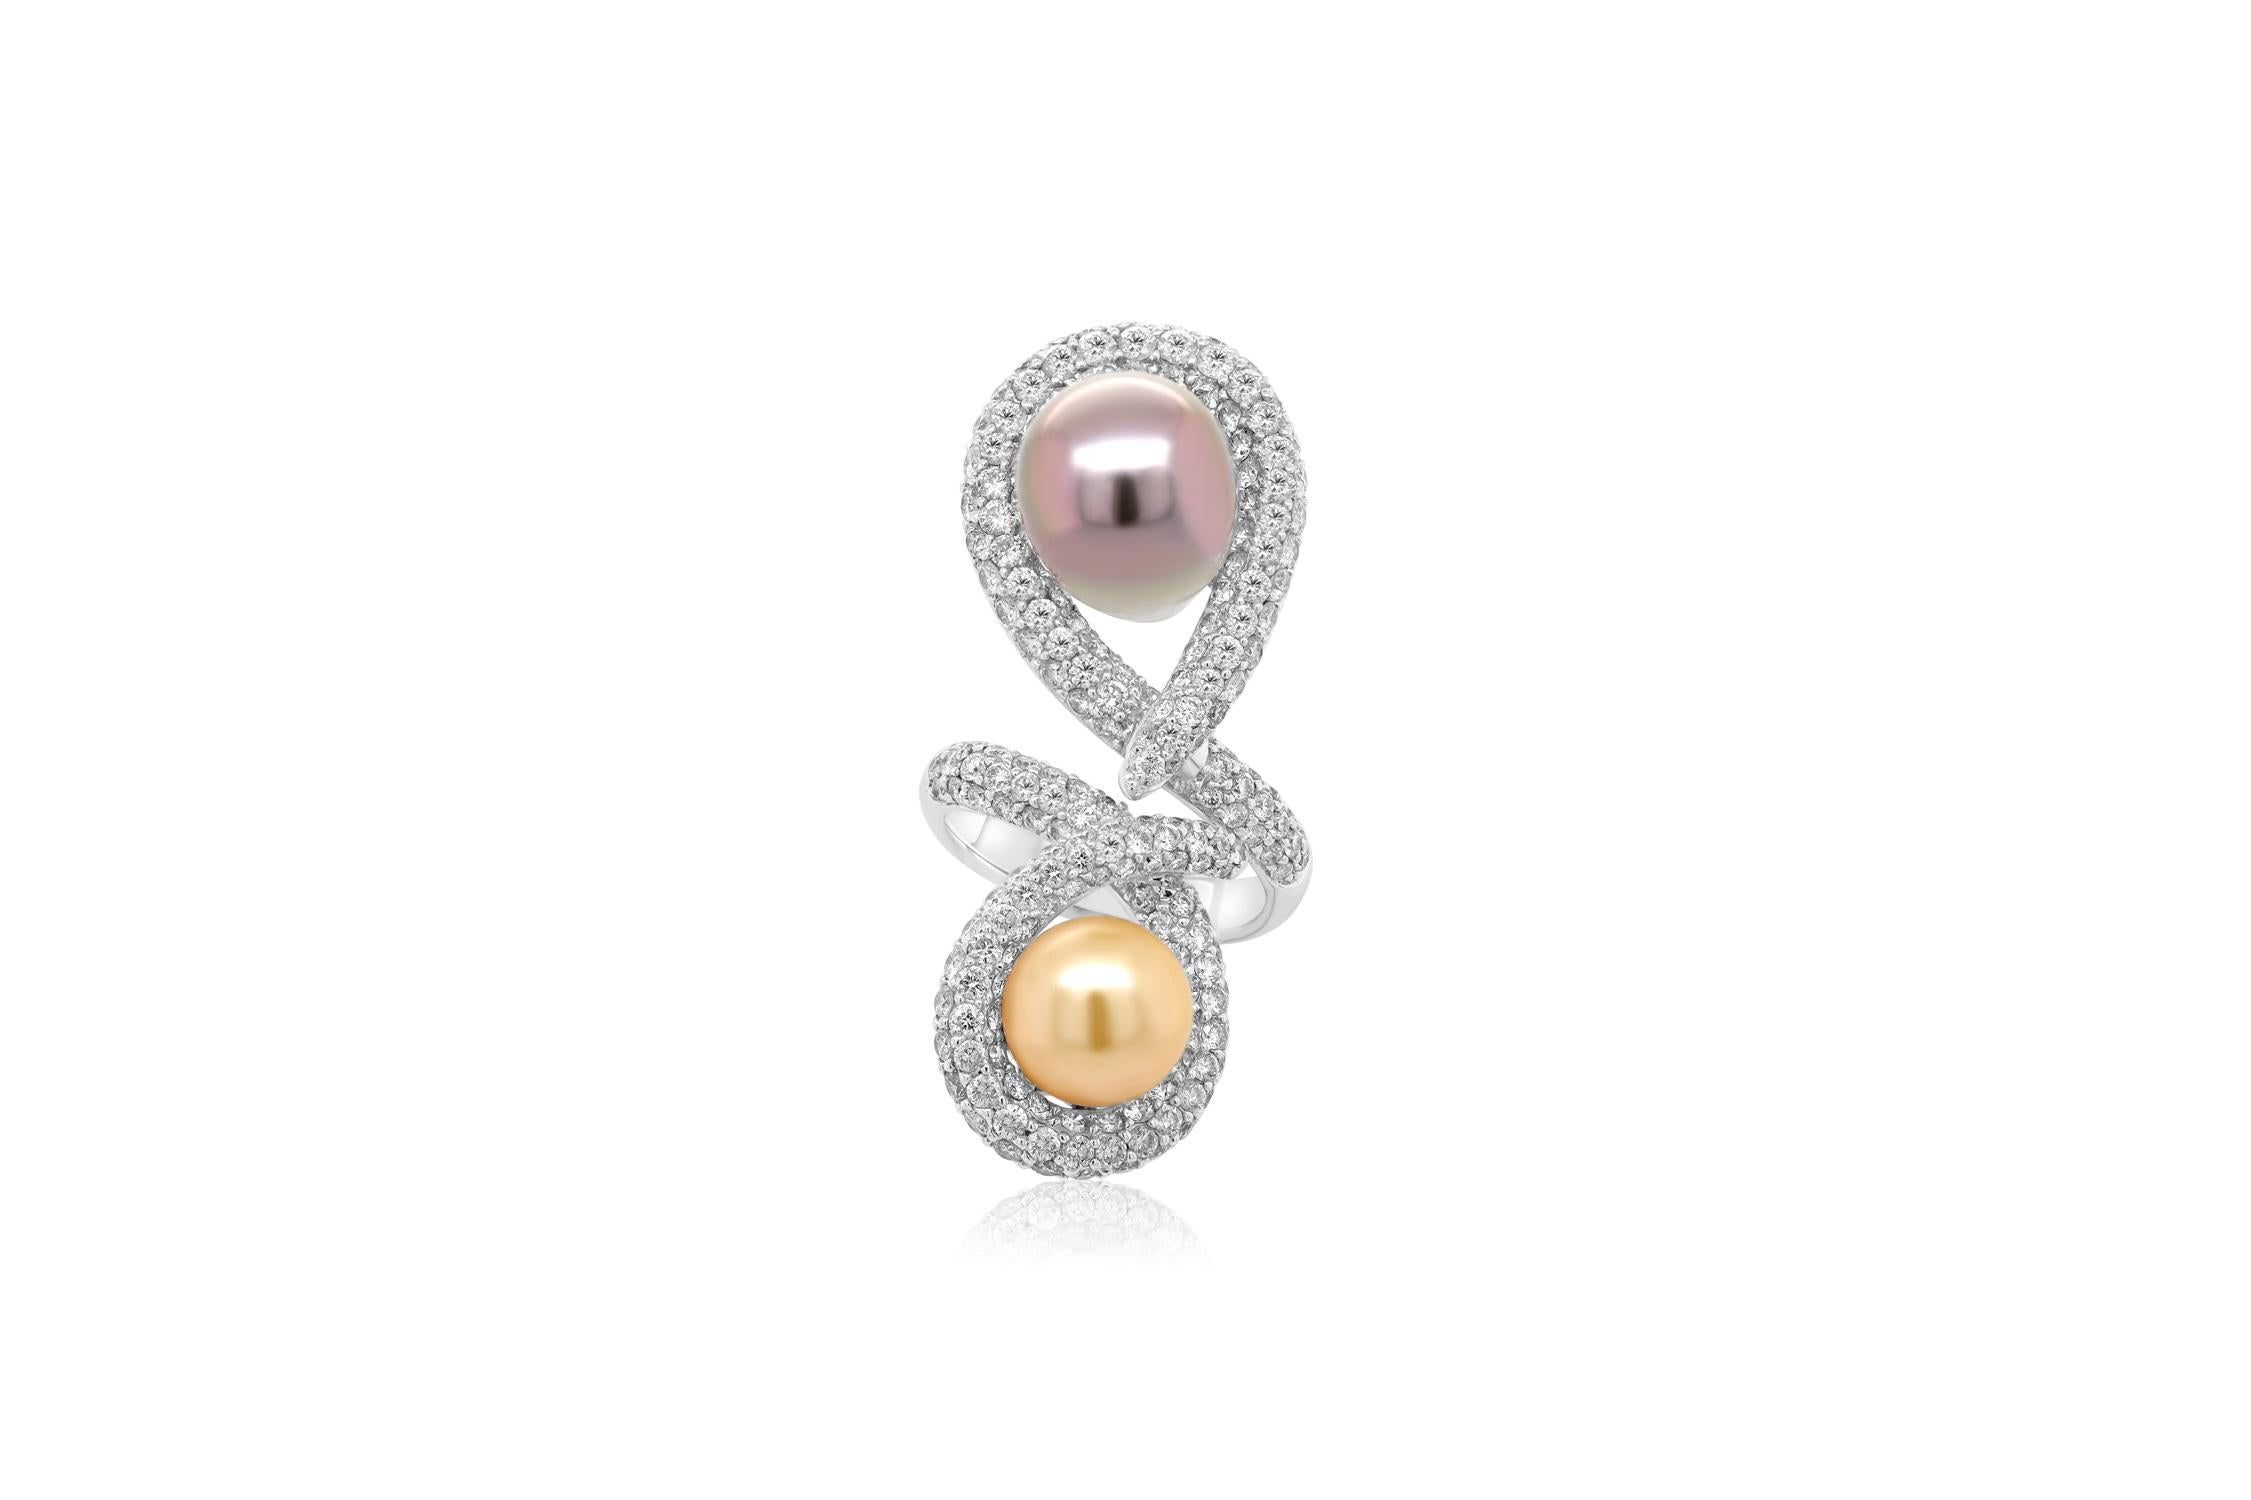 18 kt white gold diamond and pearl ring featuring a yellow and a black 11.6-11.9 mm pearl at the ends of a ring adorned with 4.32 cts tw of round diamonds.
Diana M. is a leading supplier of top-quality fine jewelry for over 35 years.
Diana M is